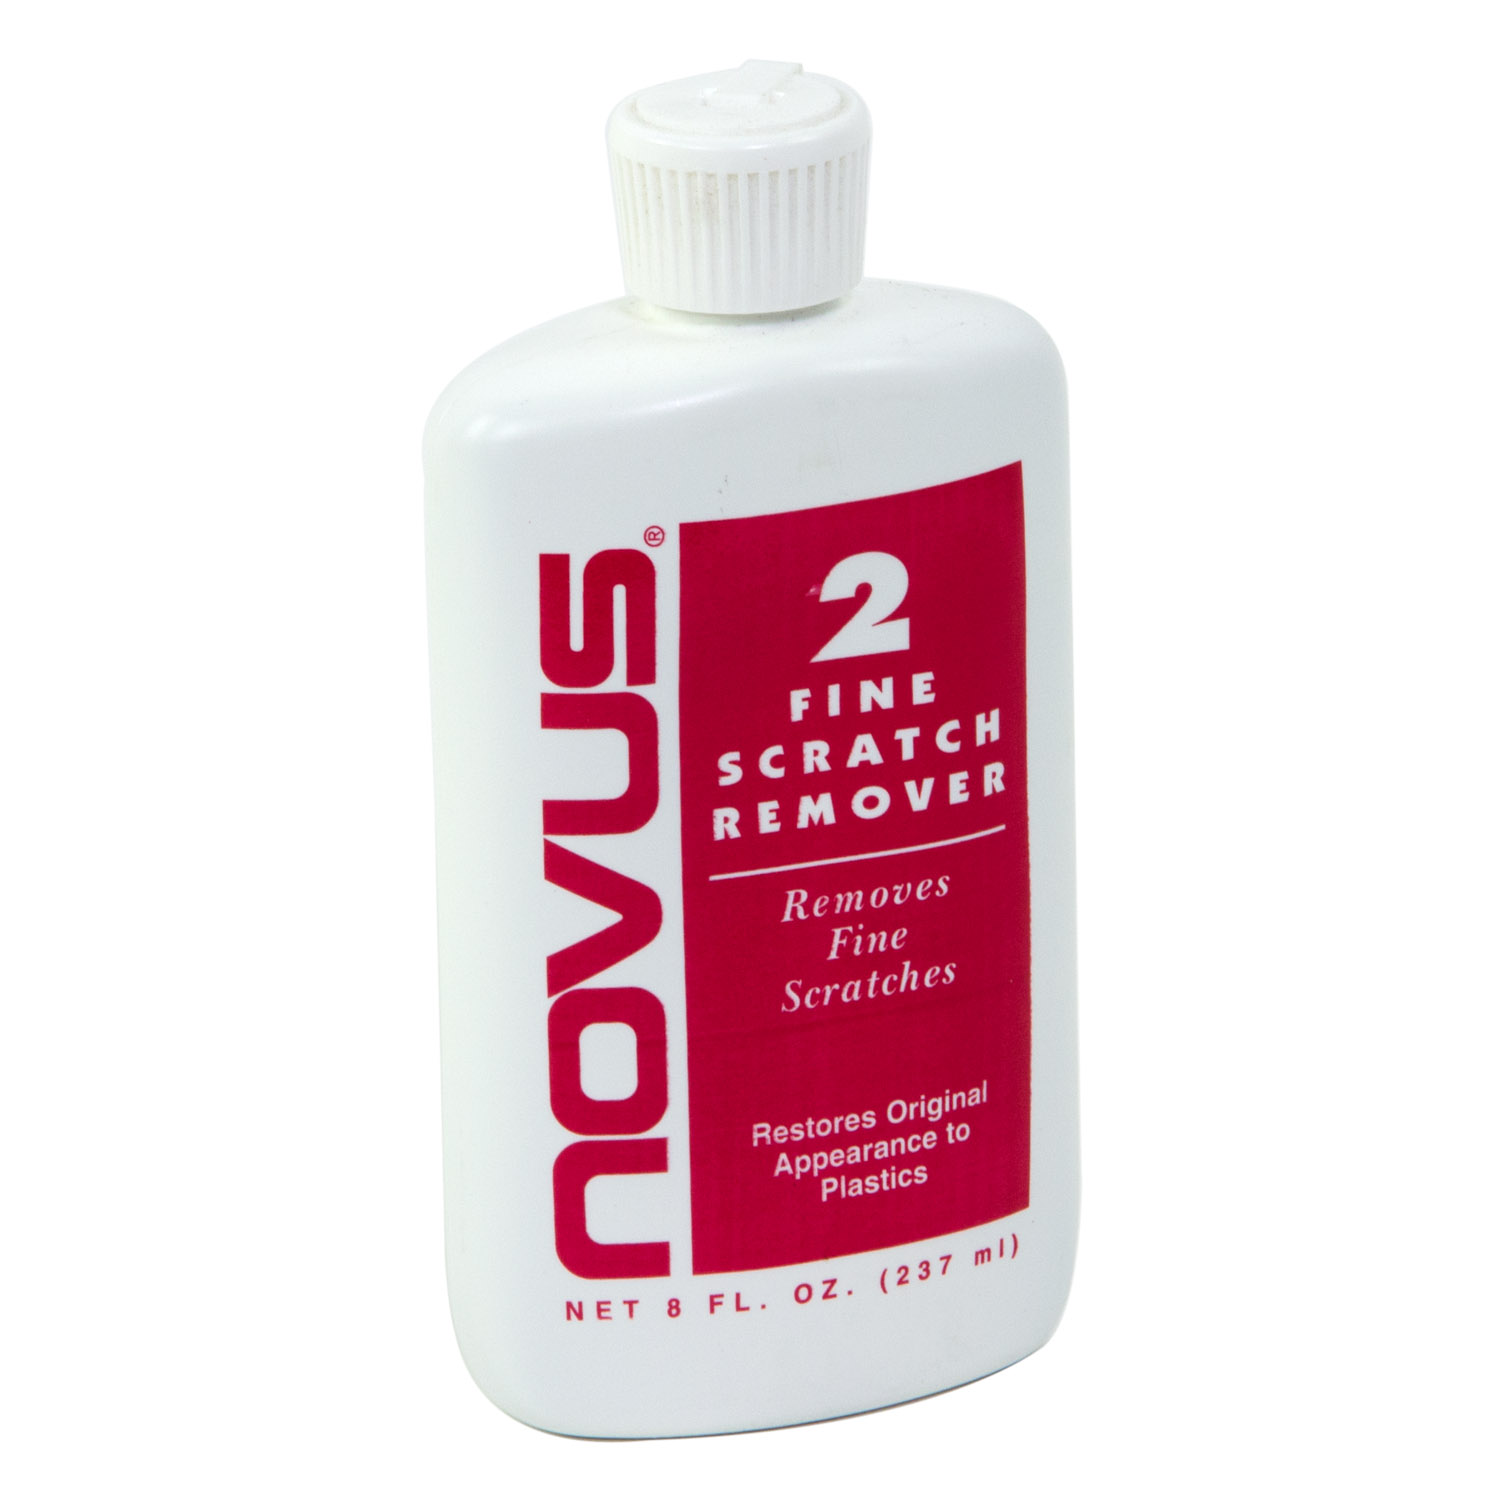 Novus Plastic Cleaner - Perfect for cleaning picture framing plexiglass